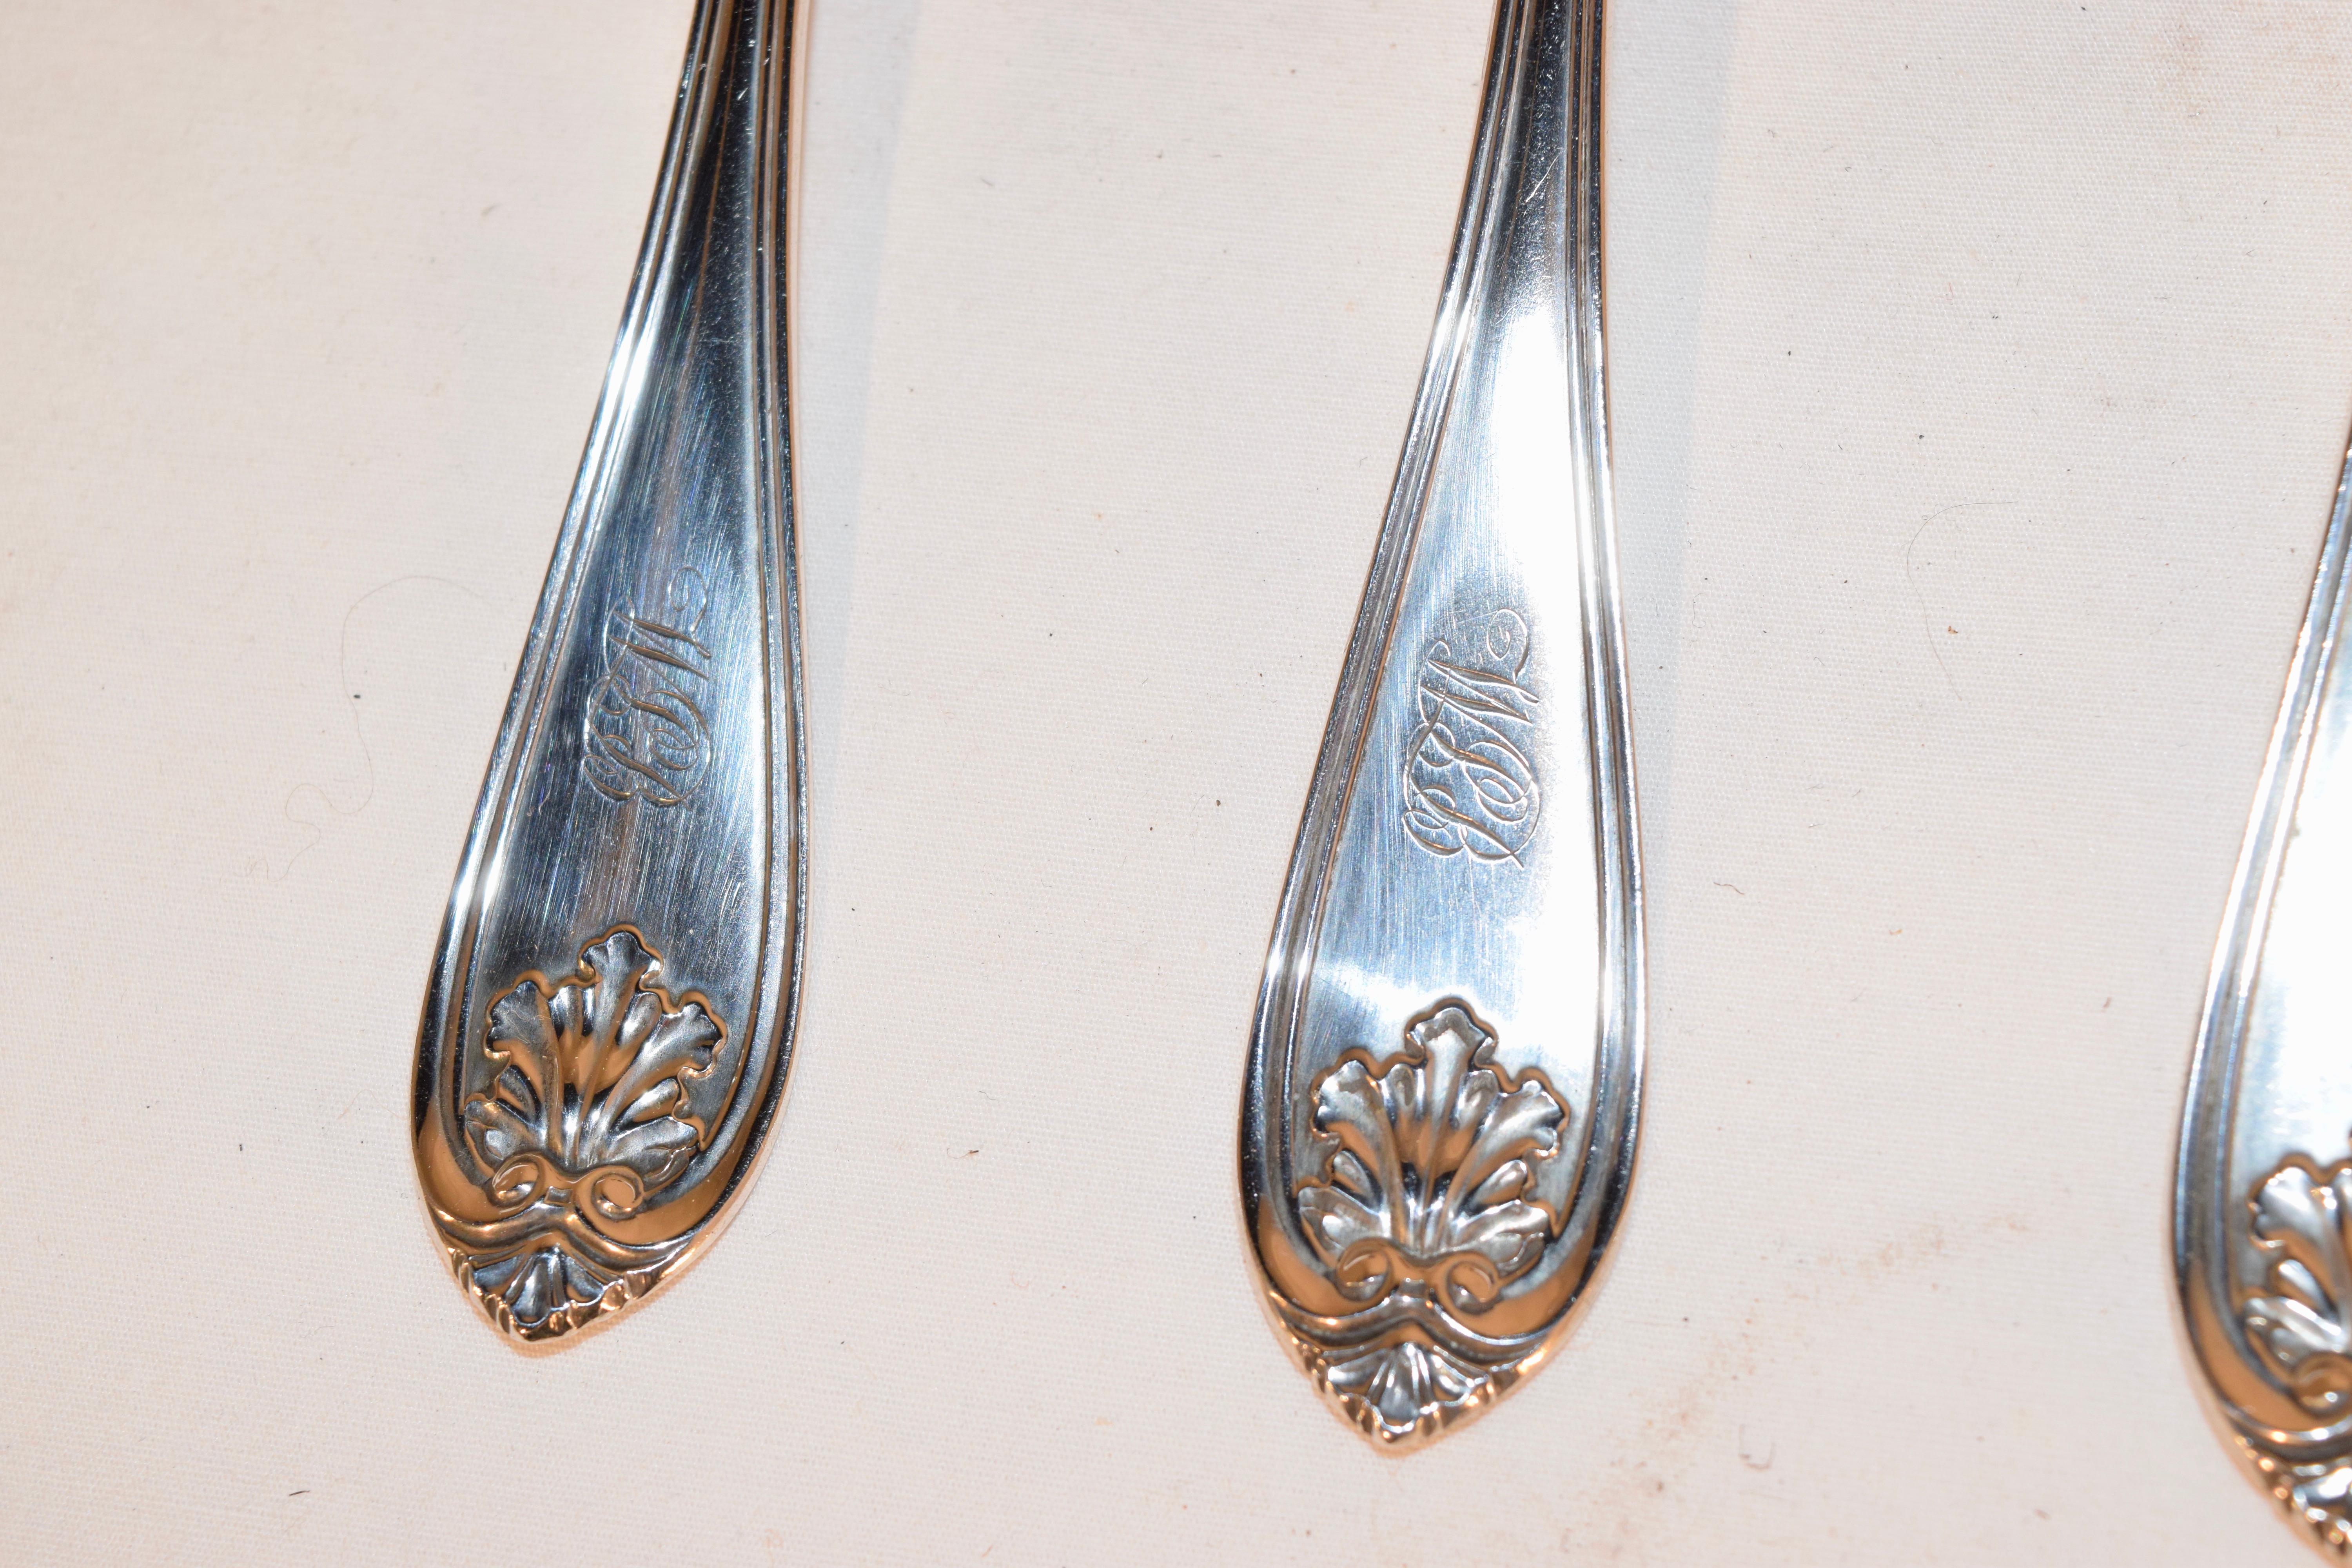 Set of six coin silver spoons circa 1855 in the shell pattern. They are marked JT & 
EM Edwards, which was in Chicago. The spoons are monogrammed on the handles appear to be WSB or WJB.